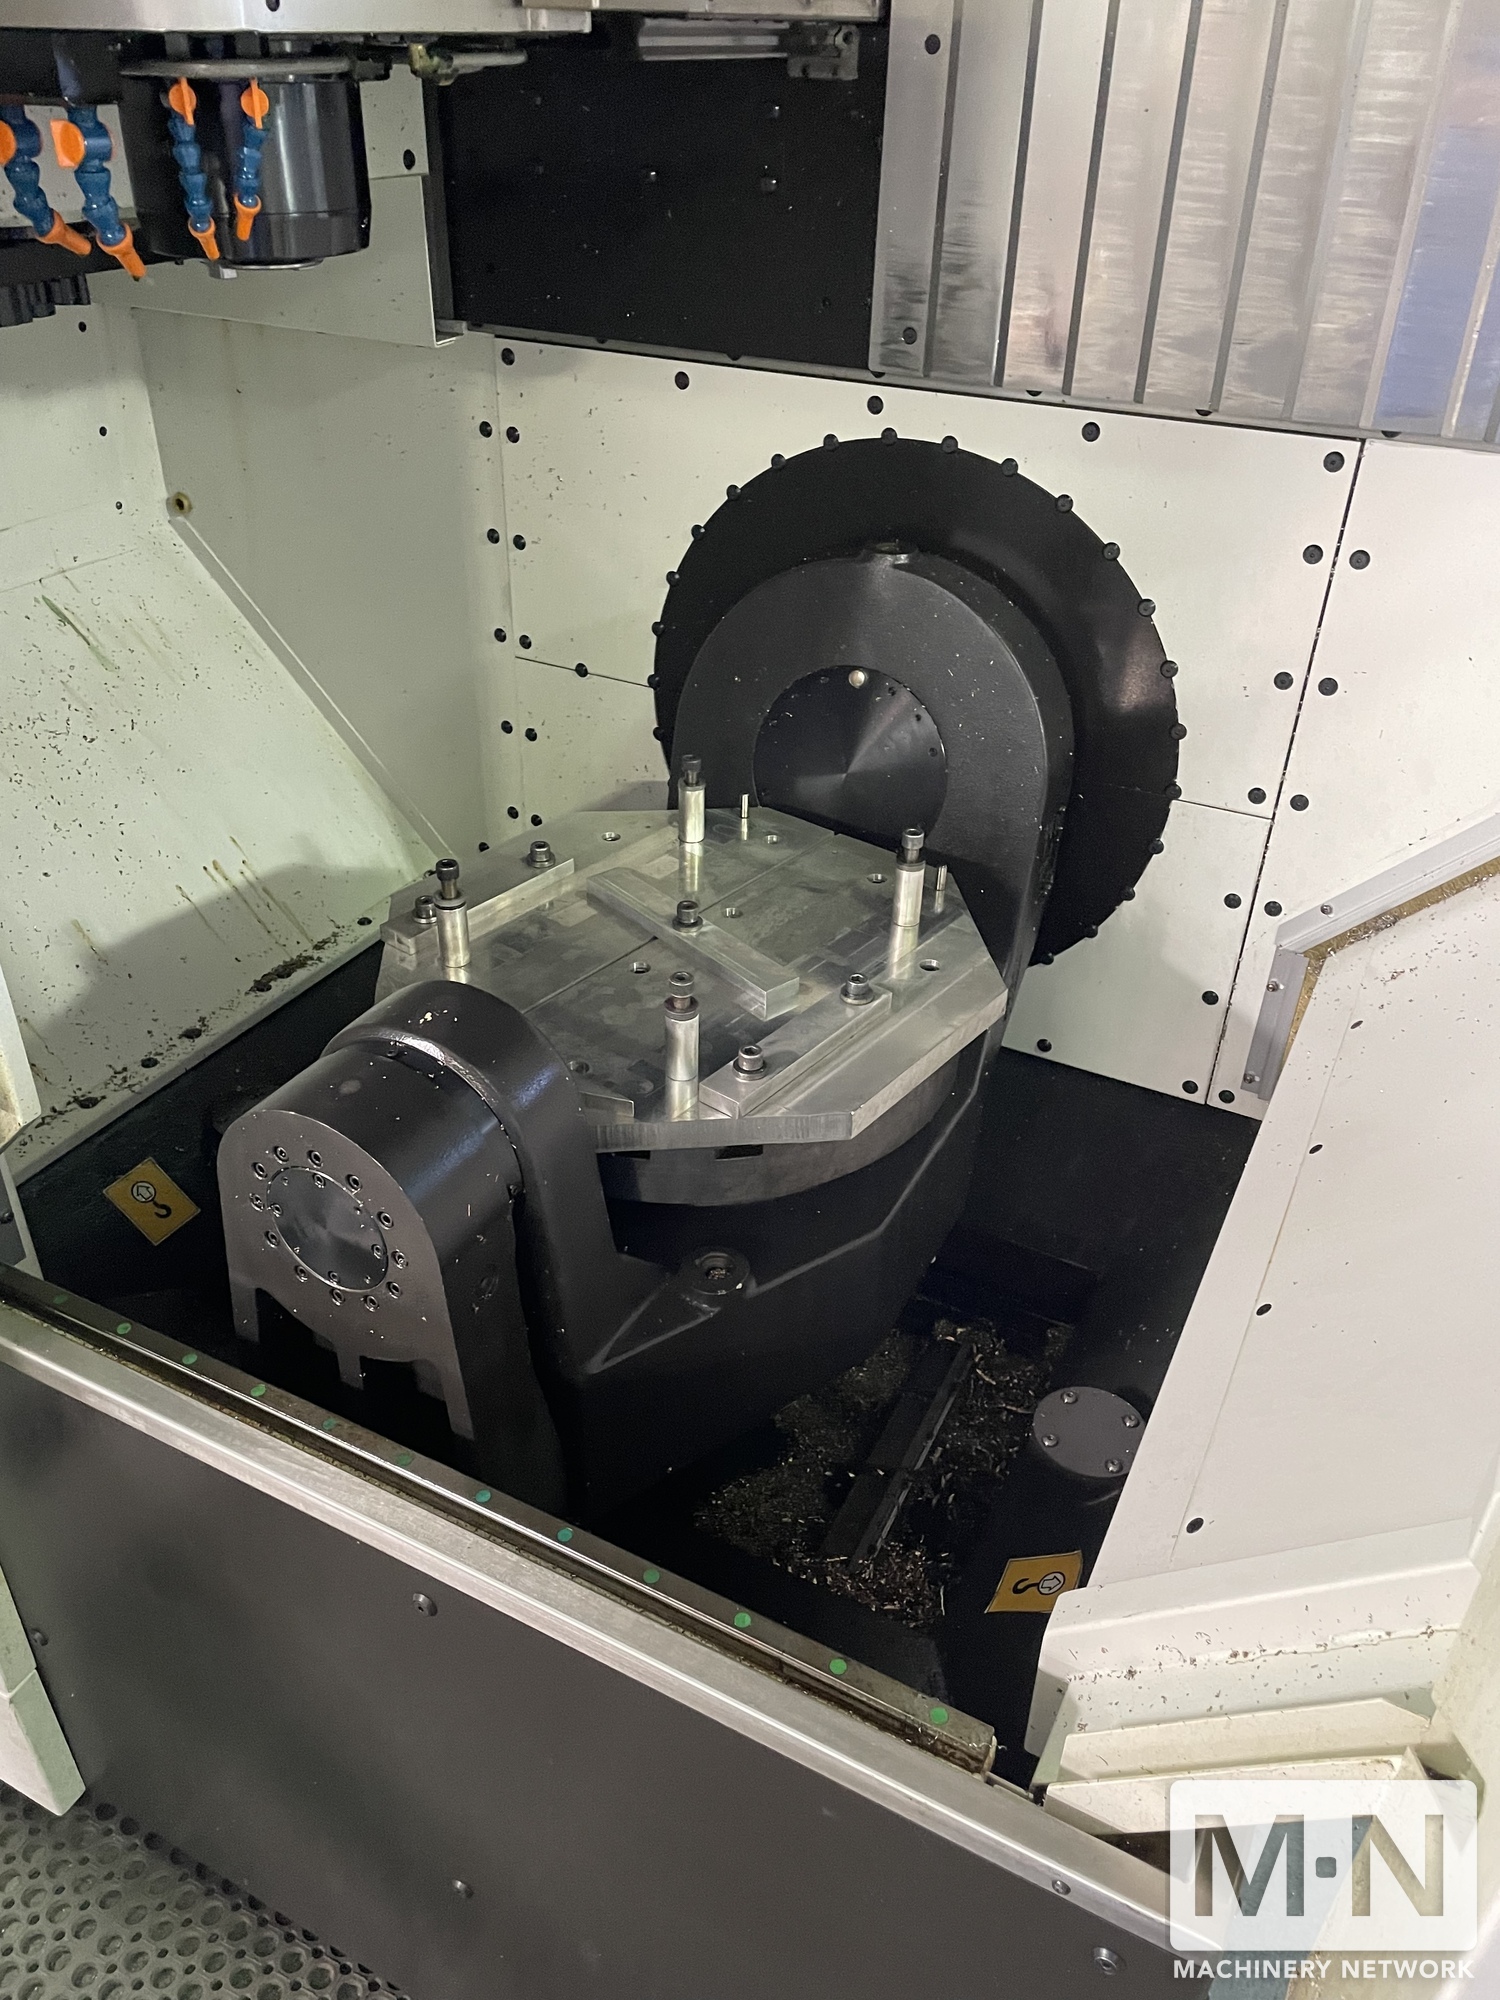 2018 +GF+ MIKRON MILL E 500U Vertical Machining Centers (5-Axis or More) | Machinery Network Inc.